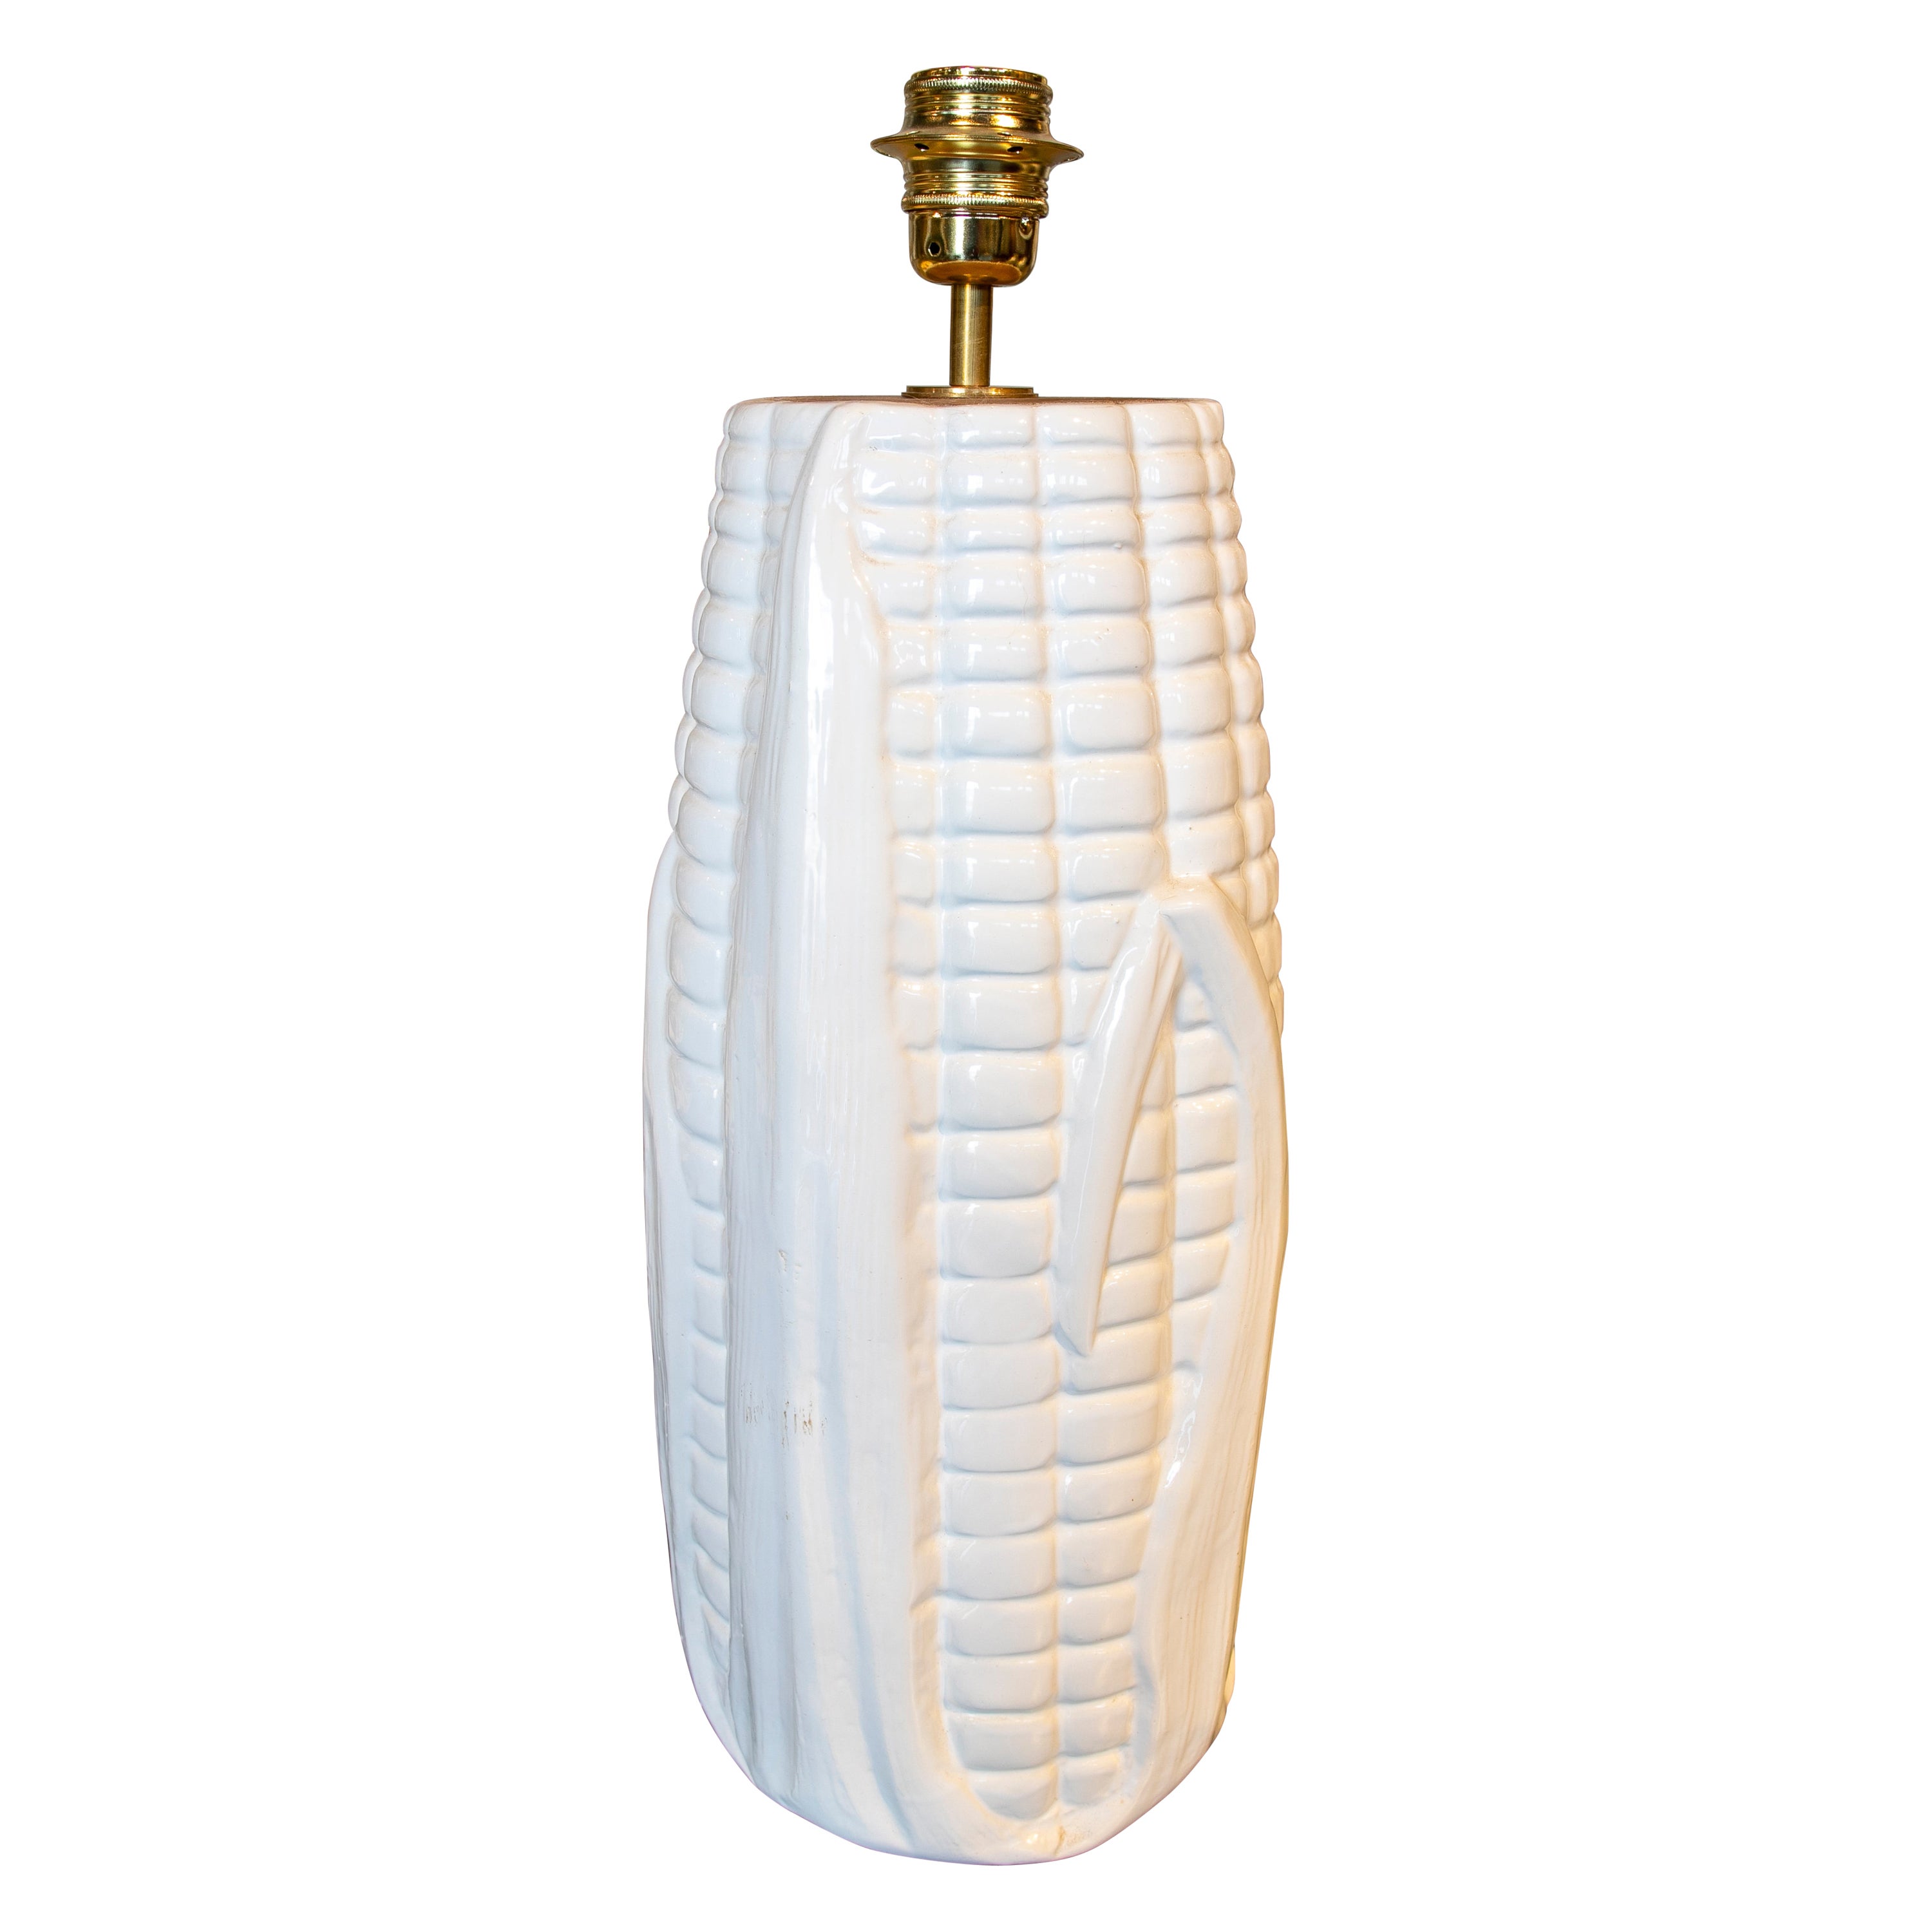 1980s Spanish Ceramic Glaced Lamp with Corn Form in White Color For Sale